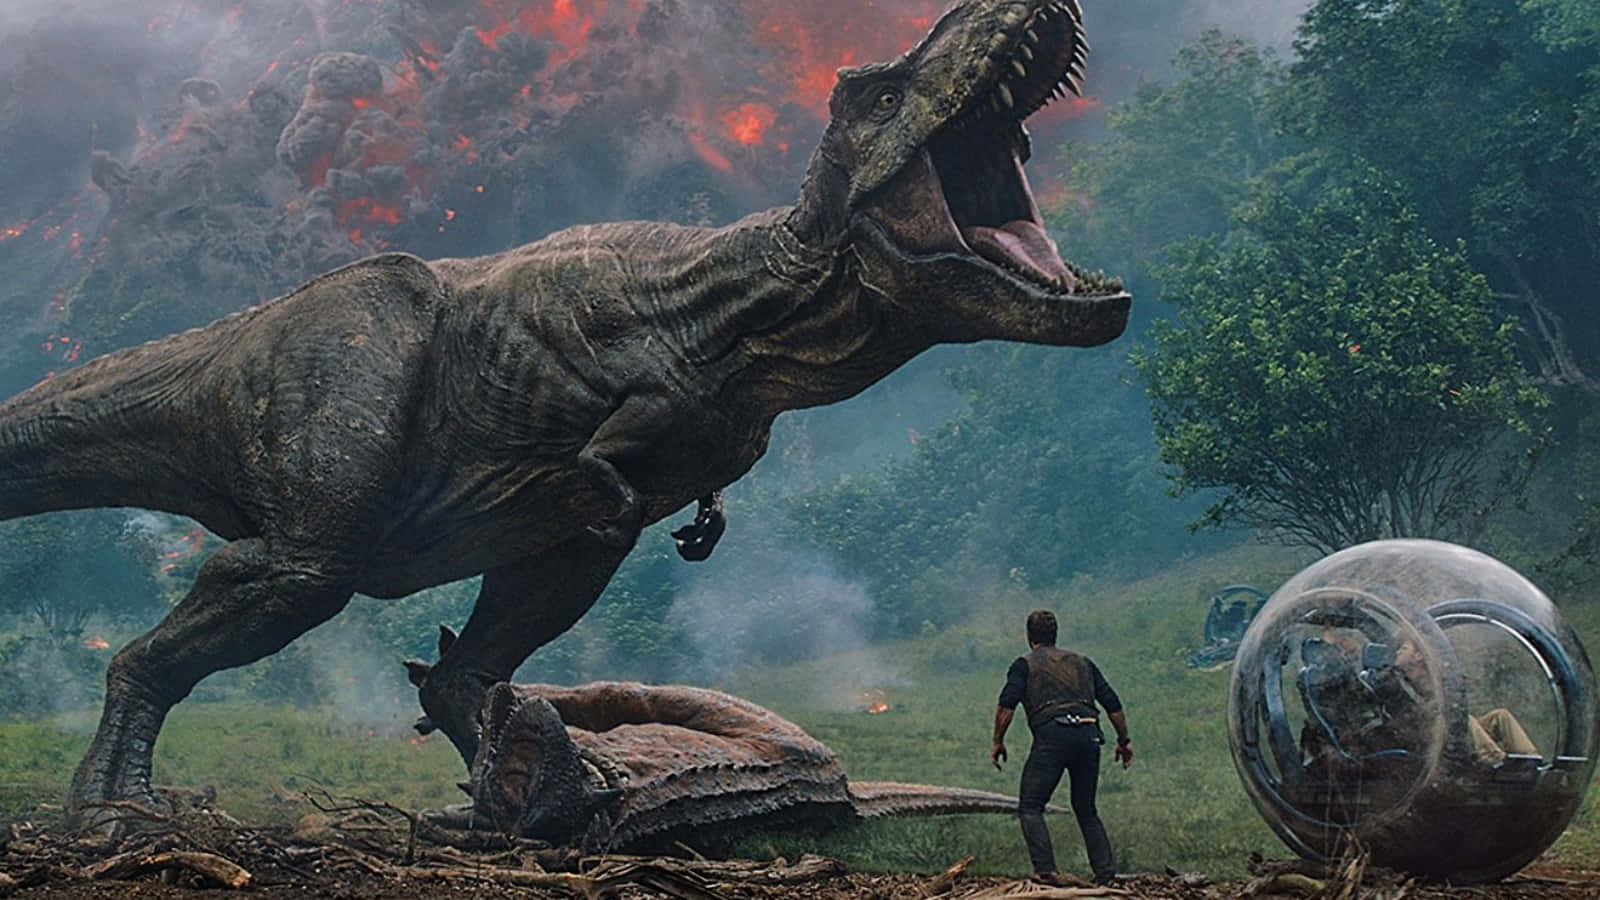 Get ready to experience the thrill of Jurassic World